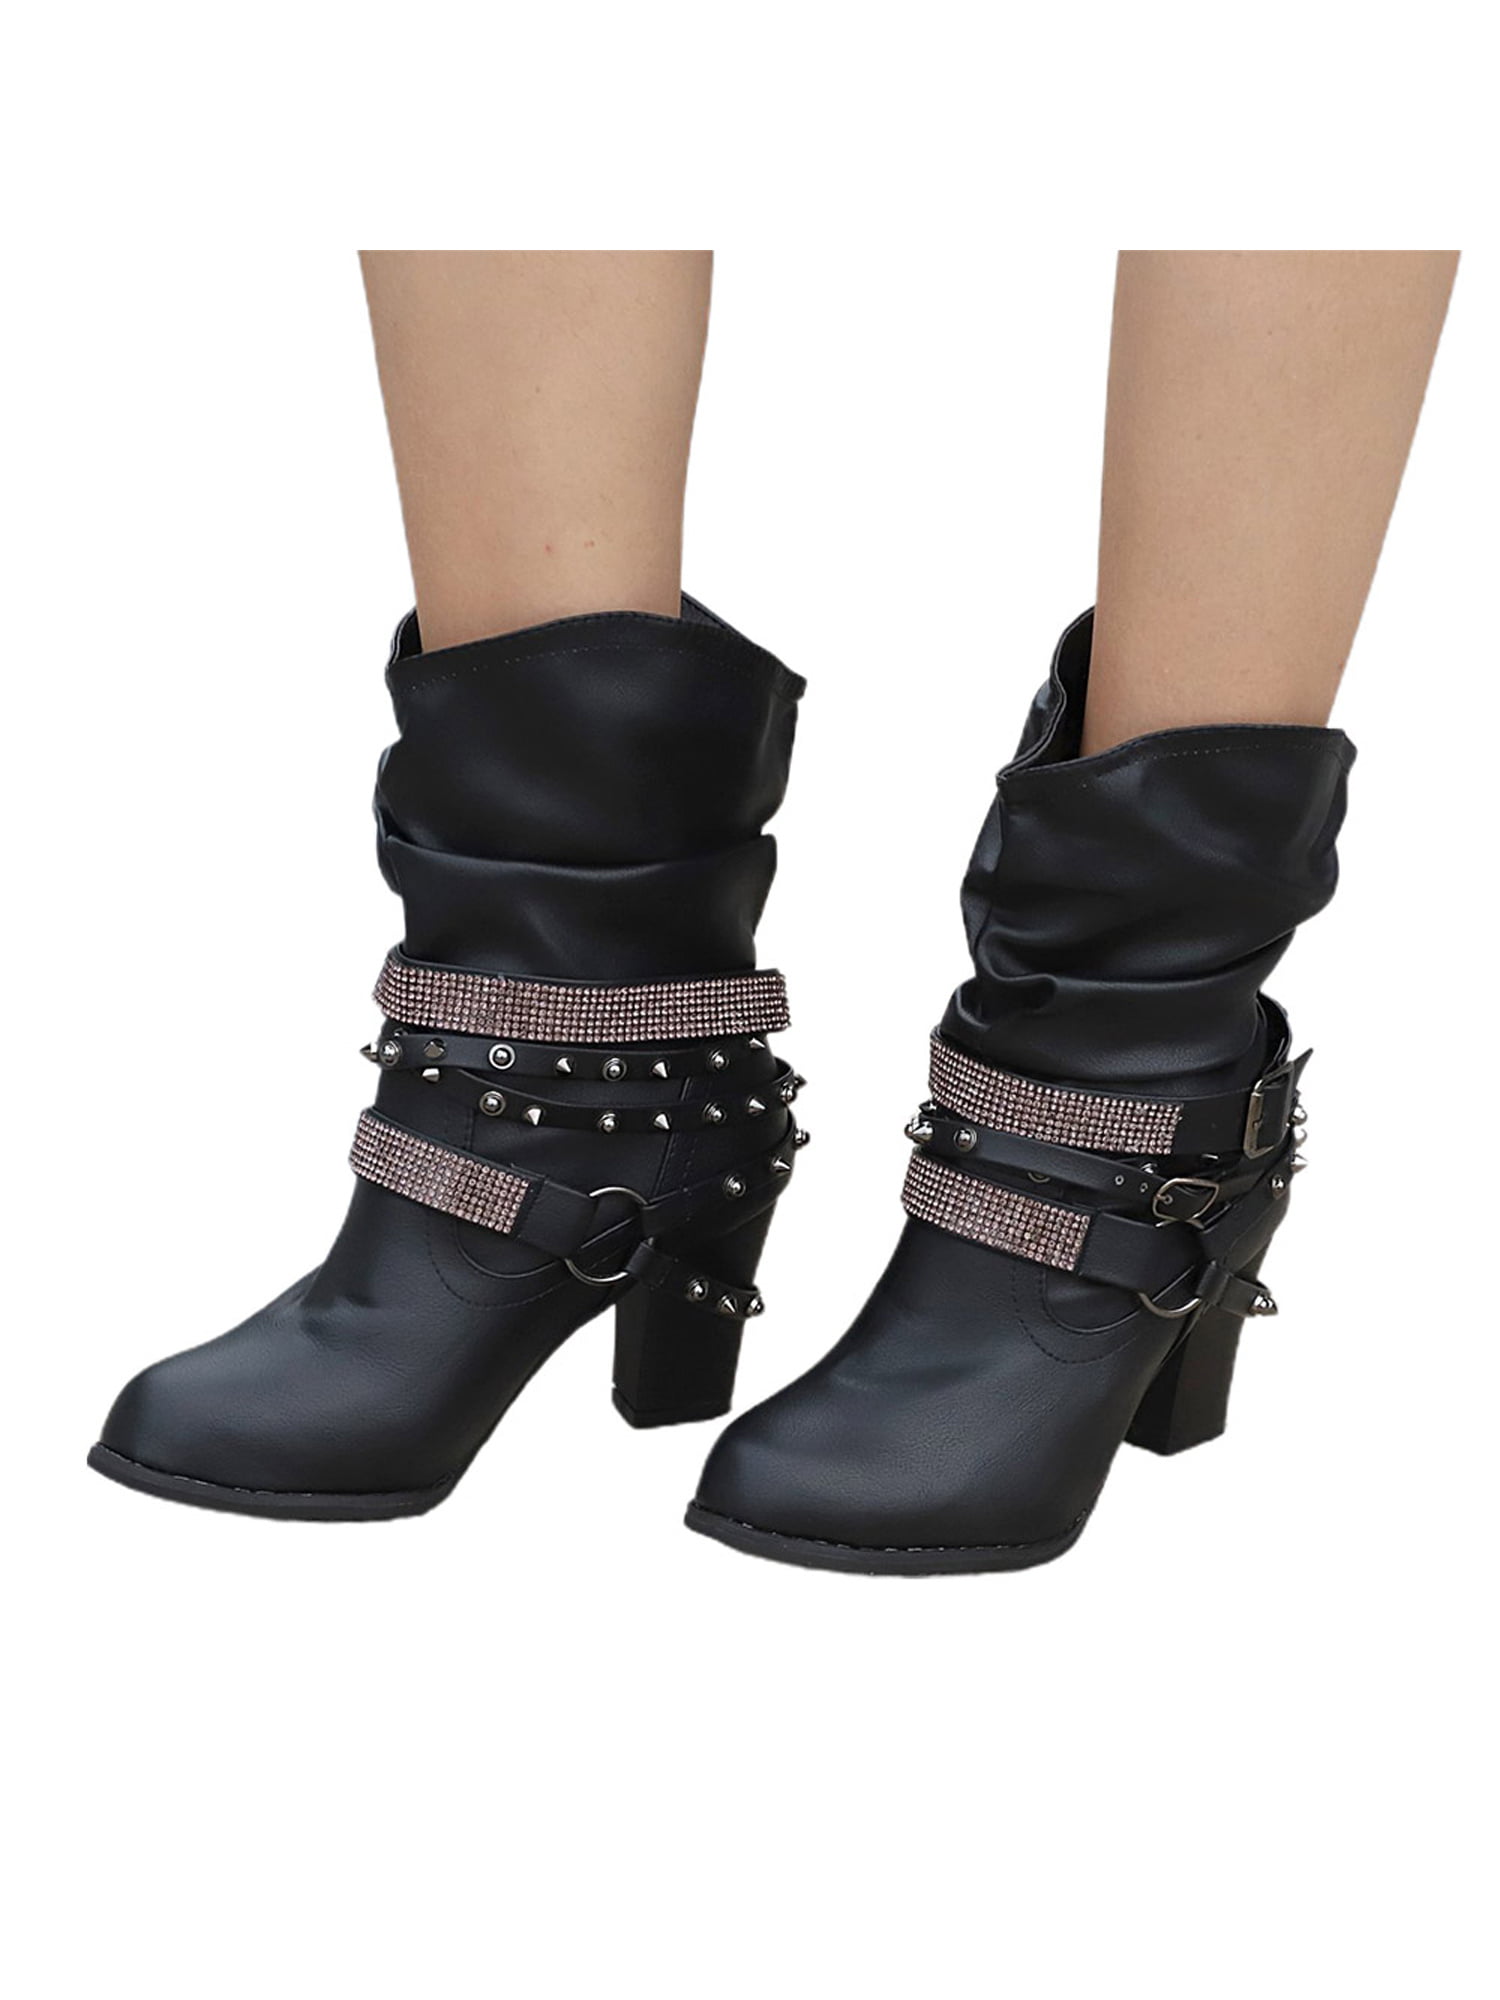 Ladies Leather Buckle Knee High Boots Thick Heels Rhinestone Rivet Slip-On Shoes